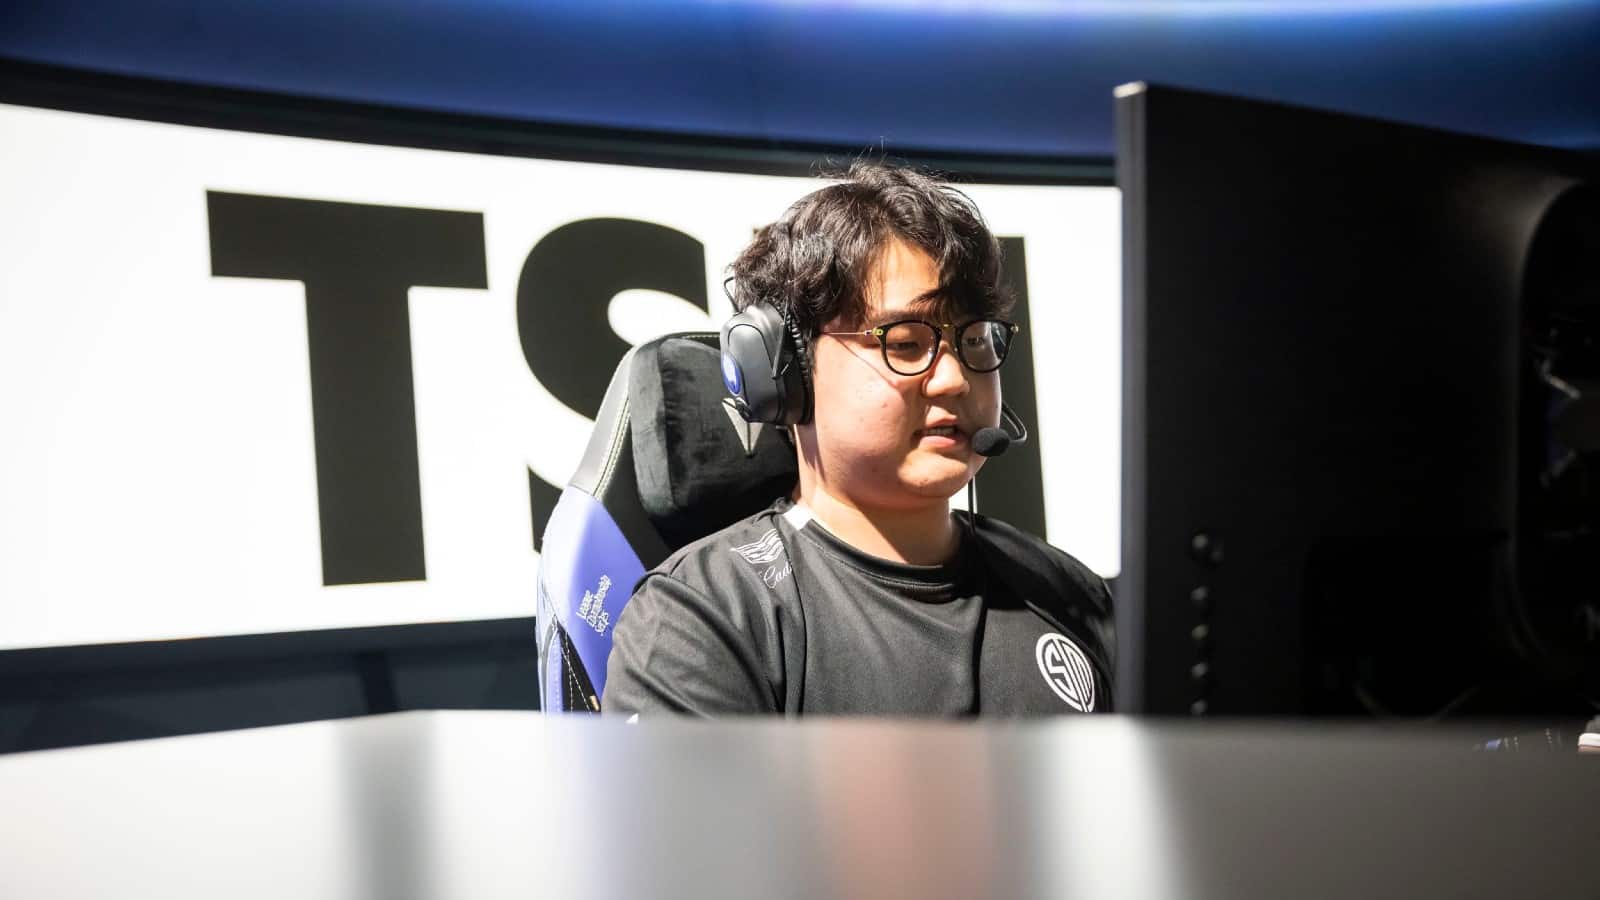 Huni competes in LoL for TSM on stage